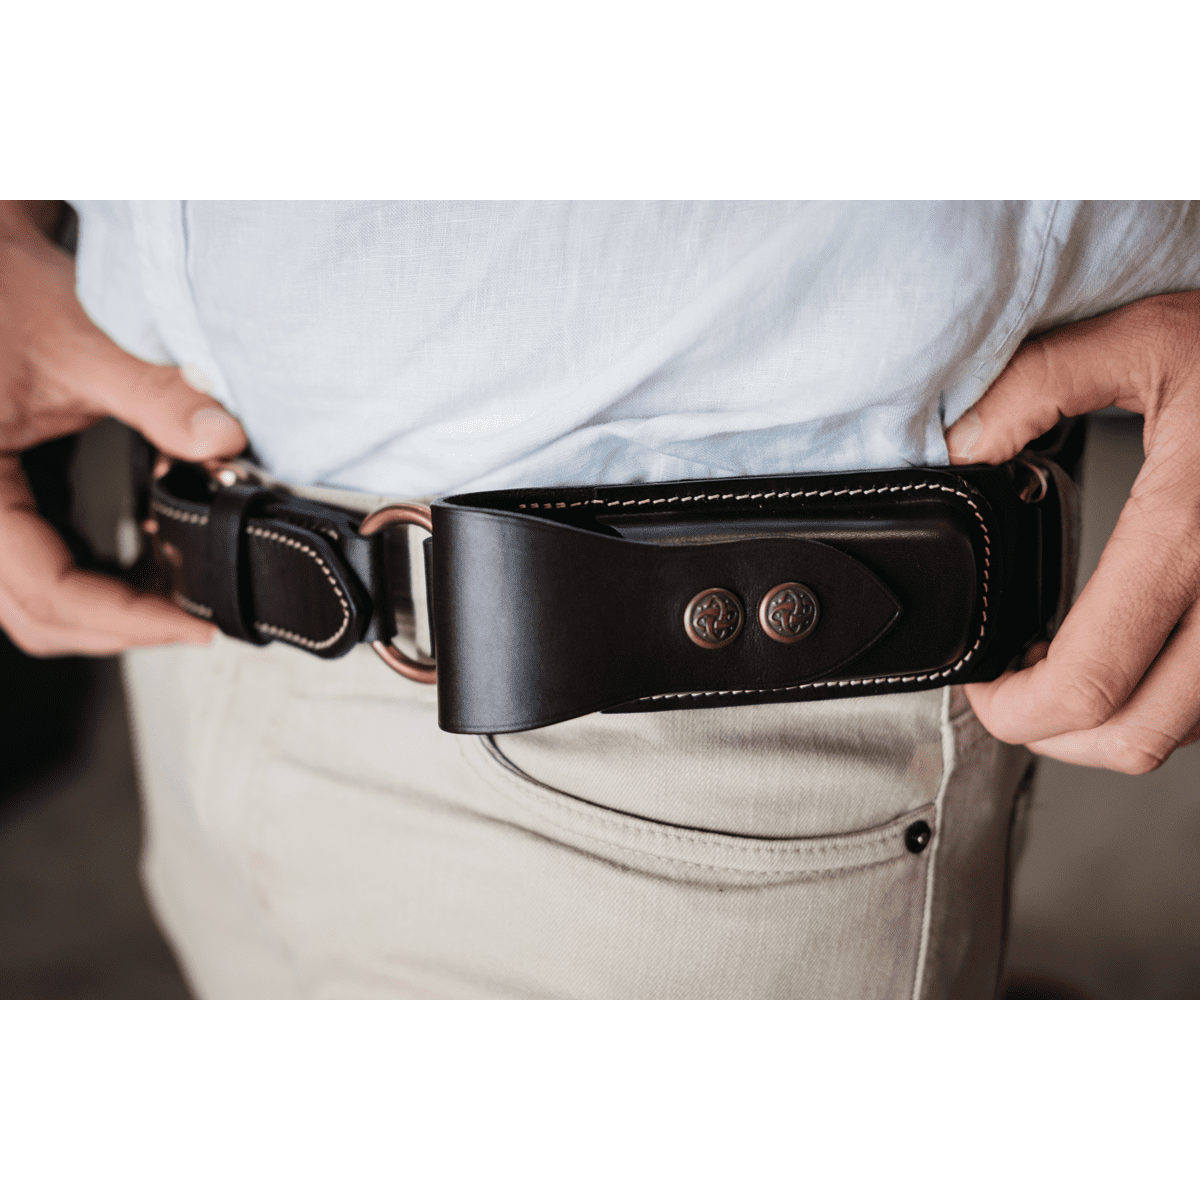 【78%OFF!】 leather pouch belt kids-nurie.com